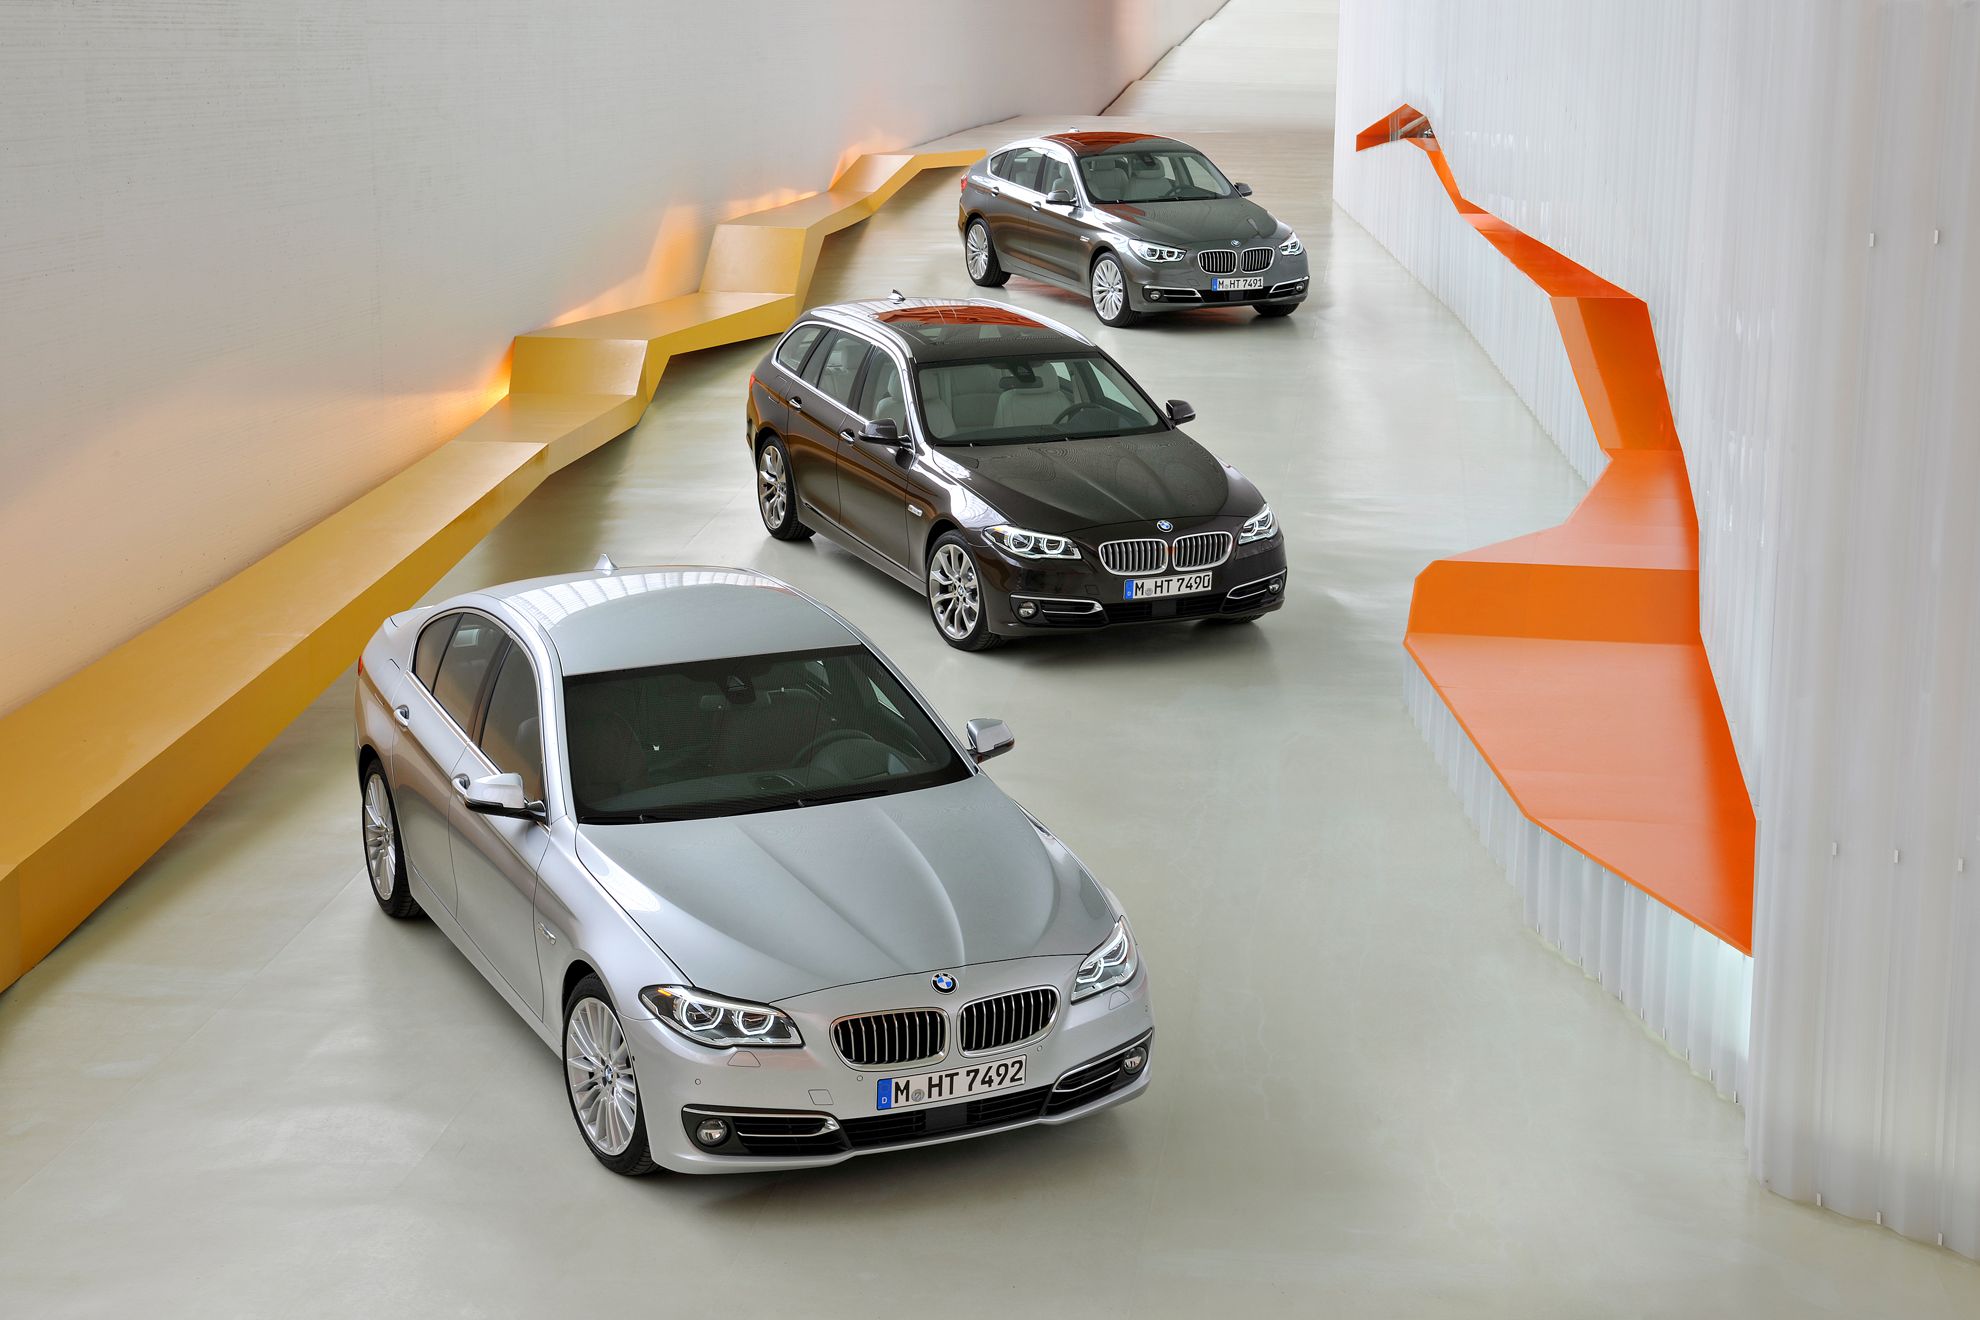 BMW 5 Series World’s most successful business automobile.